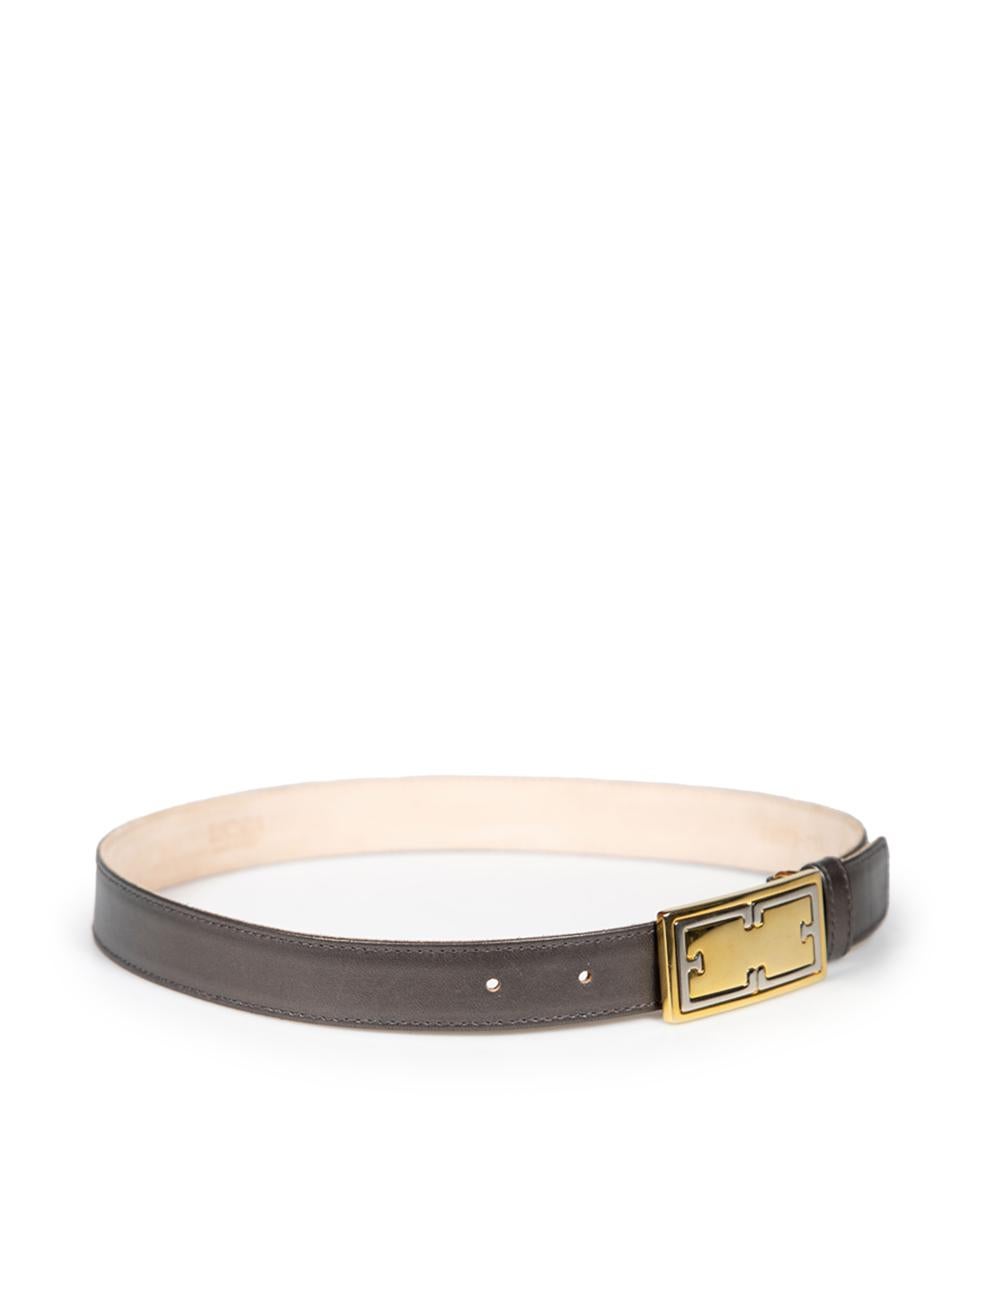 CONDITION is Very good. Minimal wear to belt is evident. Minimal wear to the buckle with slight scratches and fraying to the edges. An extra hole has been made used Escada designer resale item.
 
 
 
 Details
 
 
 Grey metallic
 
 Leather
 
 Belt
 
